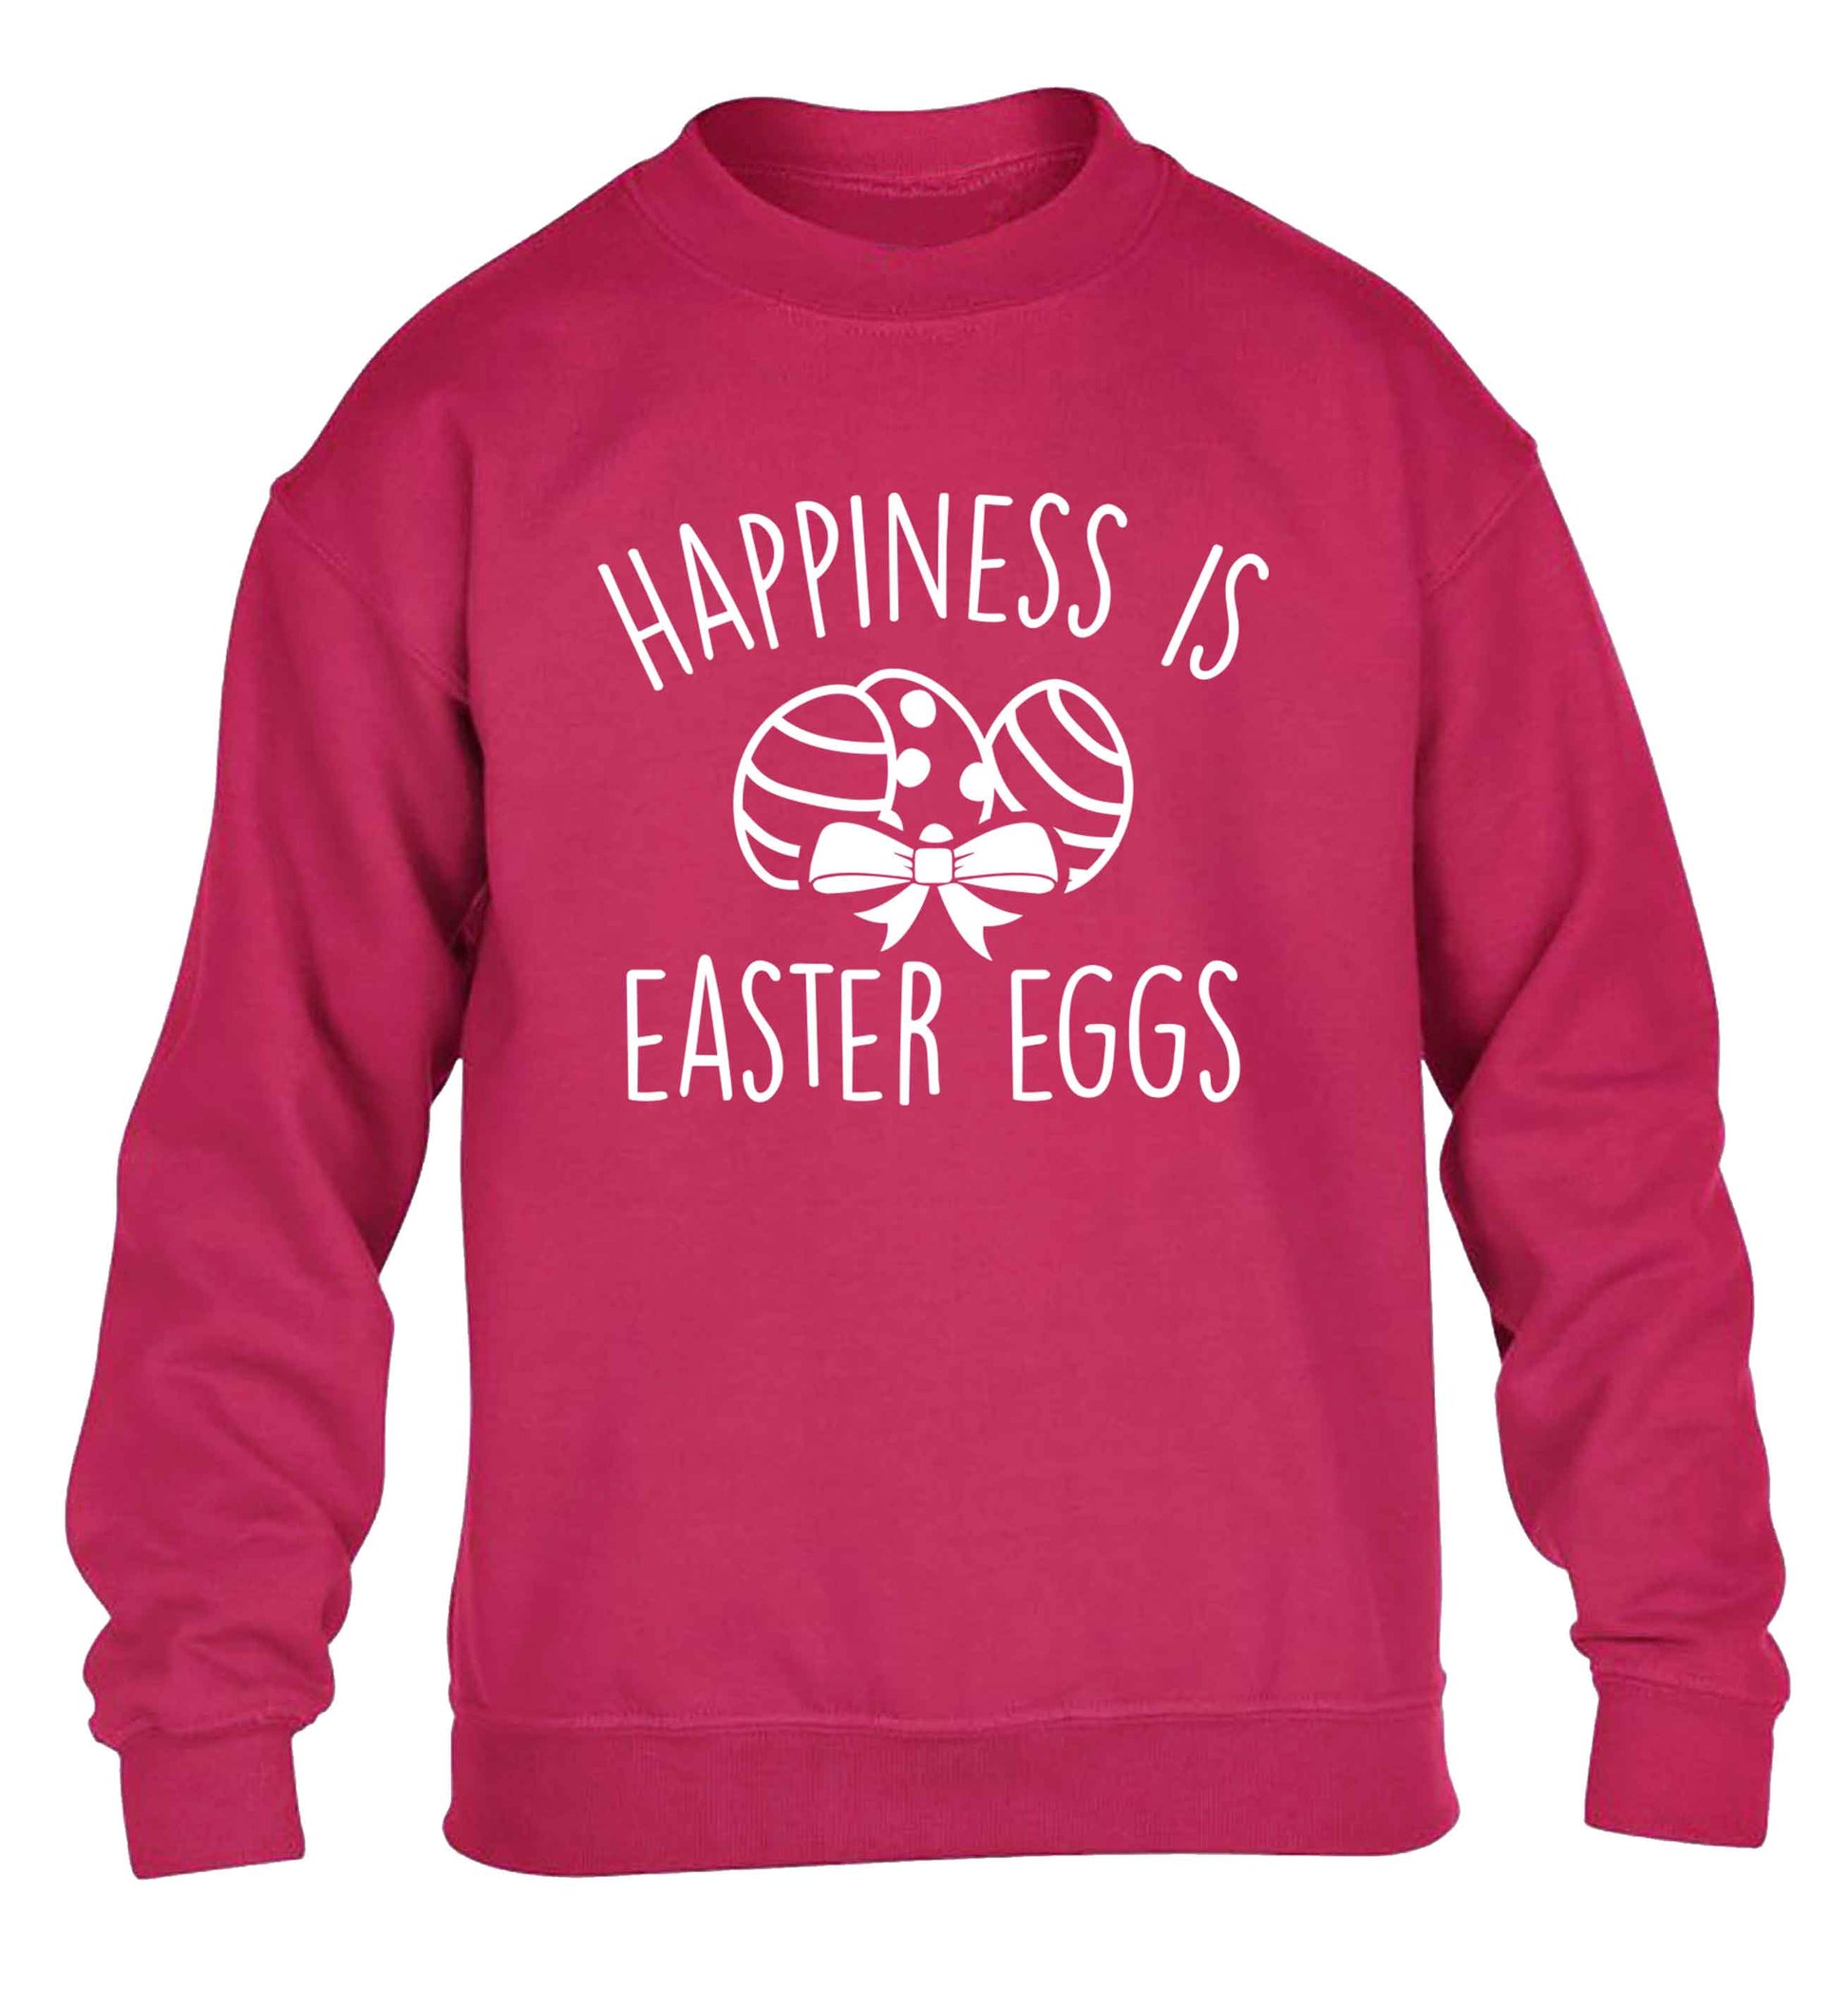 Happiness is Easter eggs children's pink sweater 12-13 Years